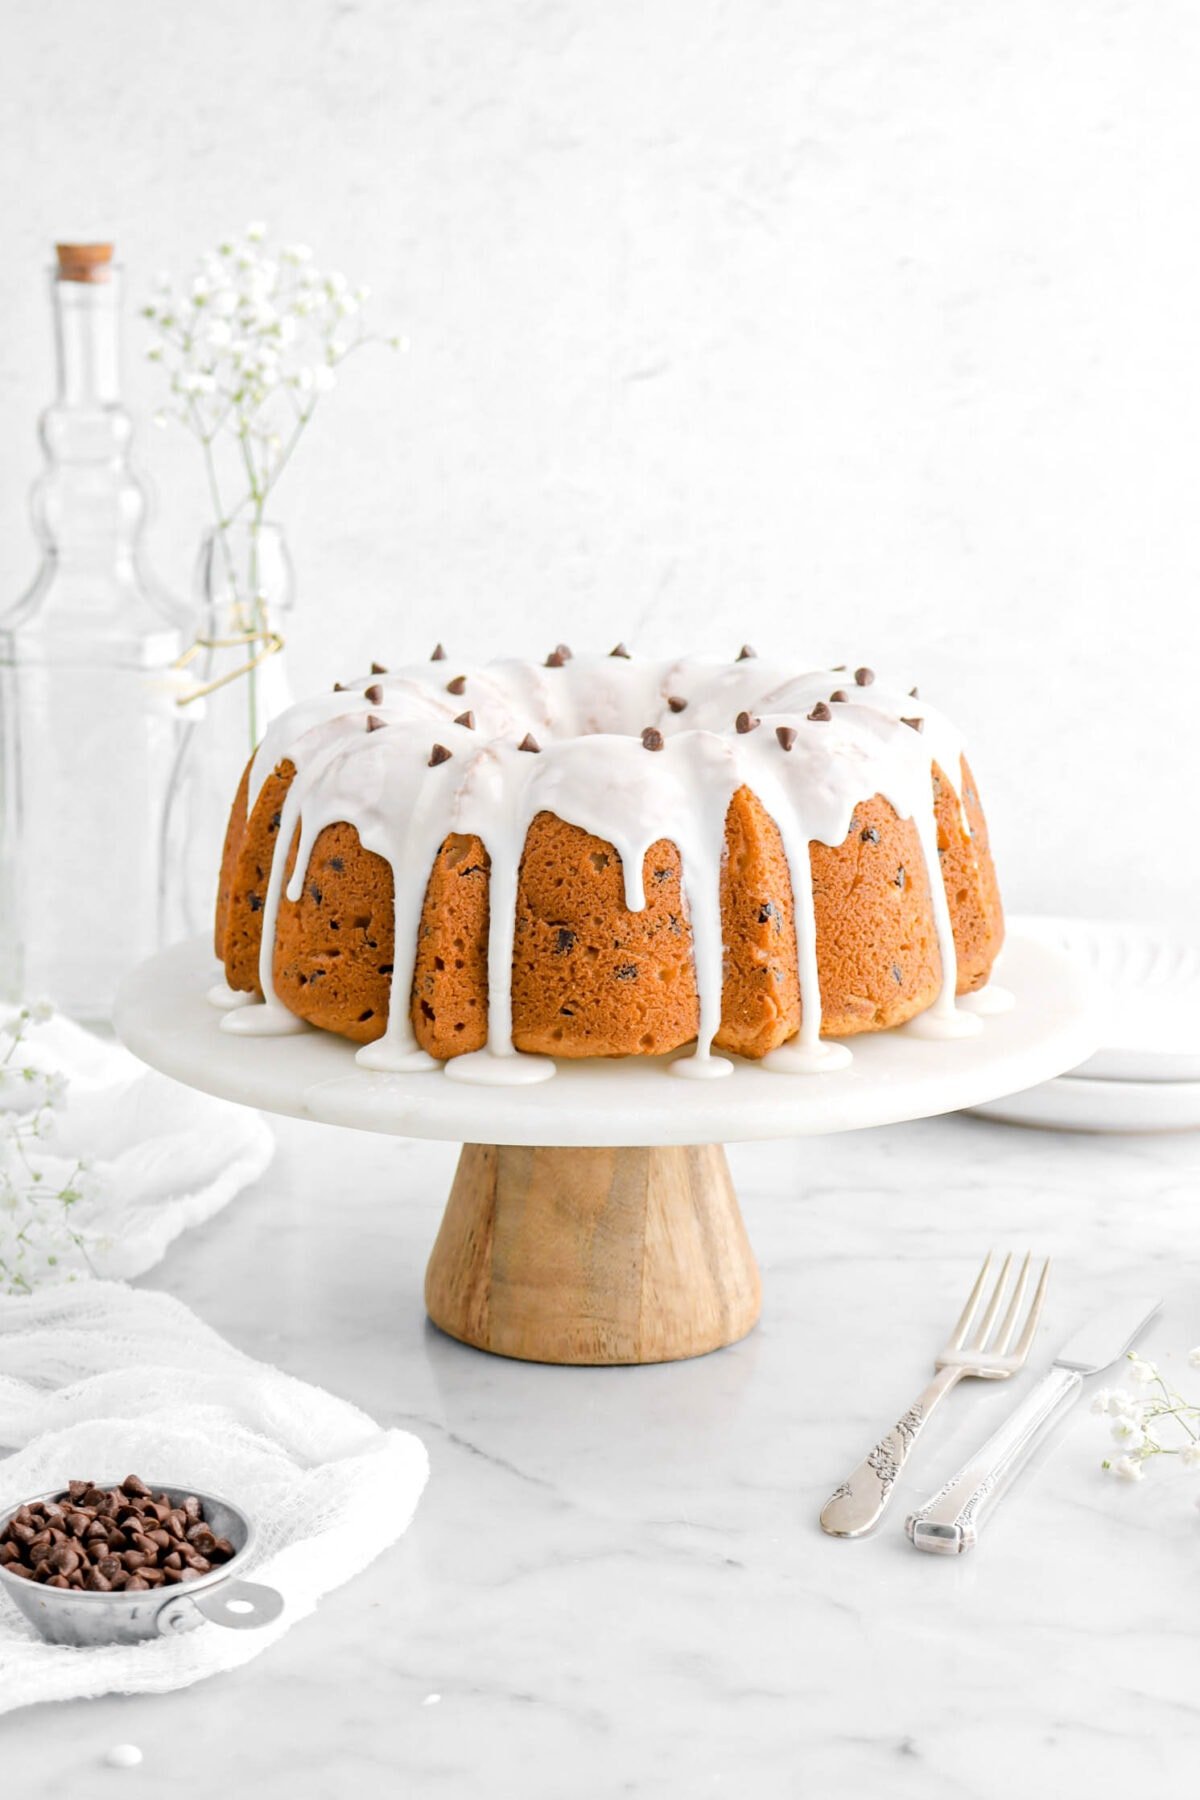 bundt cake on cake stand with icing and chocolate chips on top, a measuring cup of chocolate chips, a fork and knife, a white cheesecloth, and flowers beside.